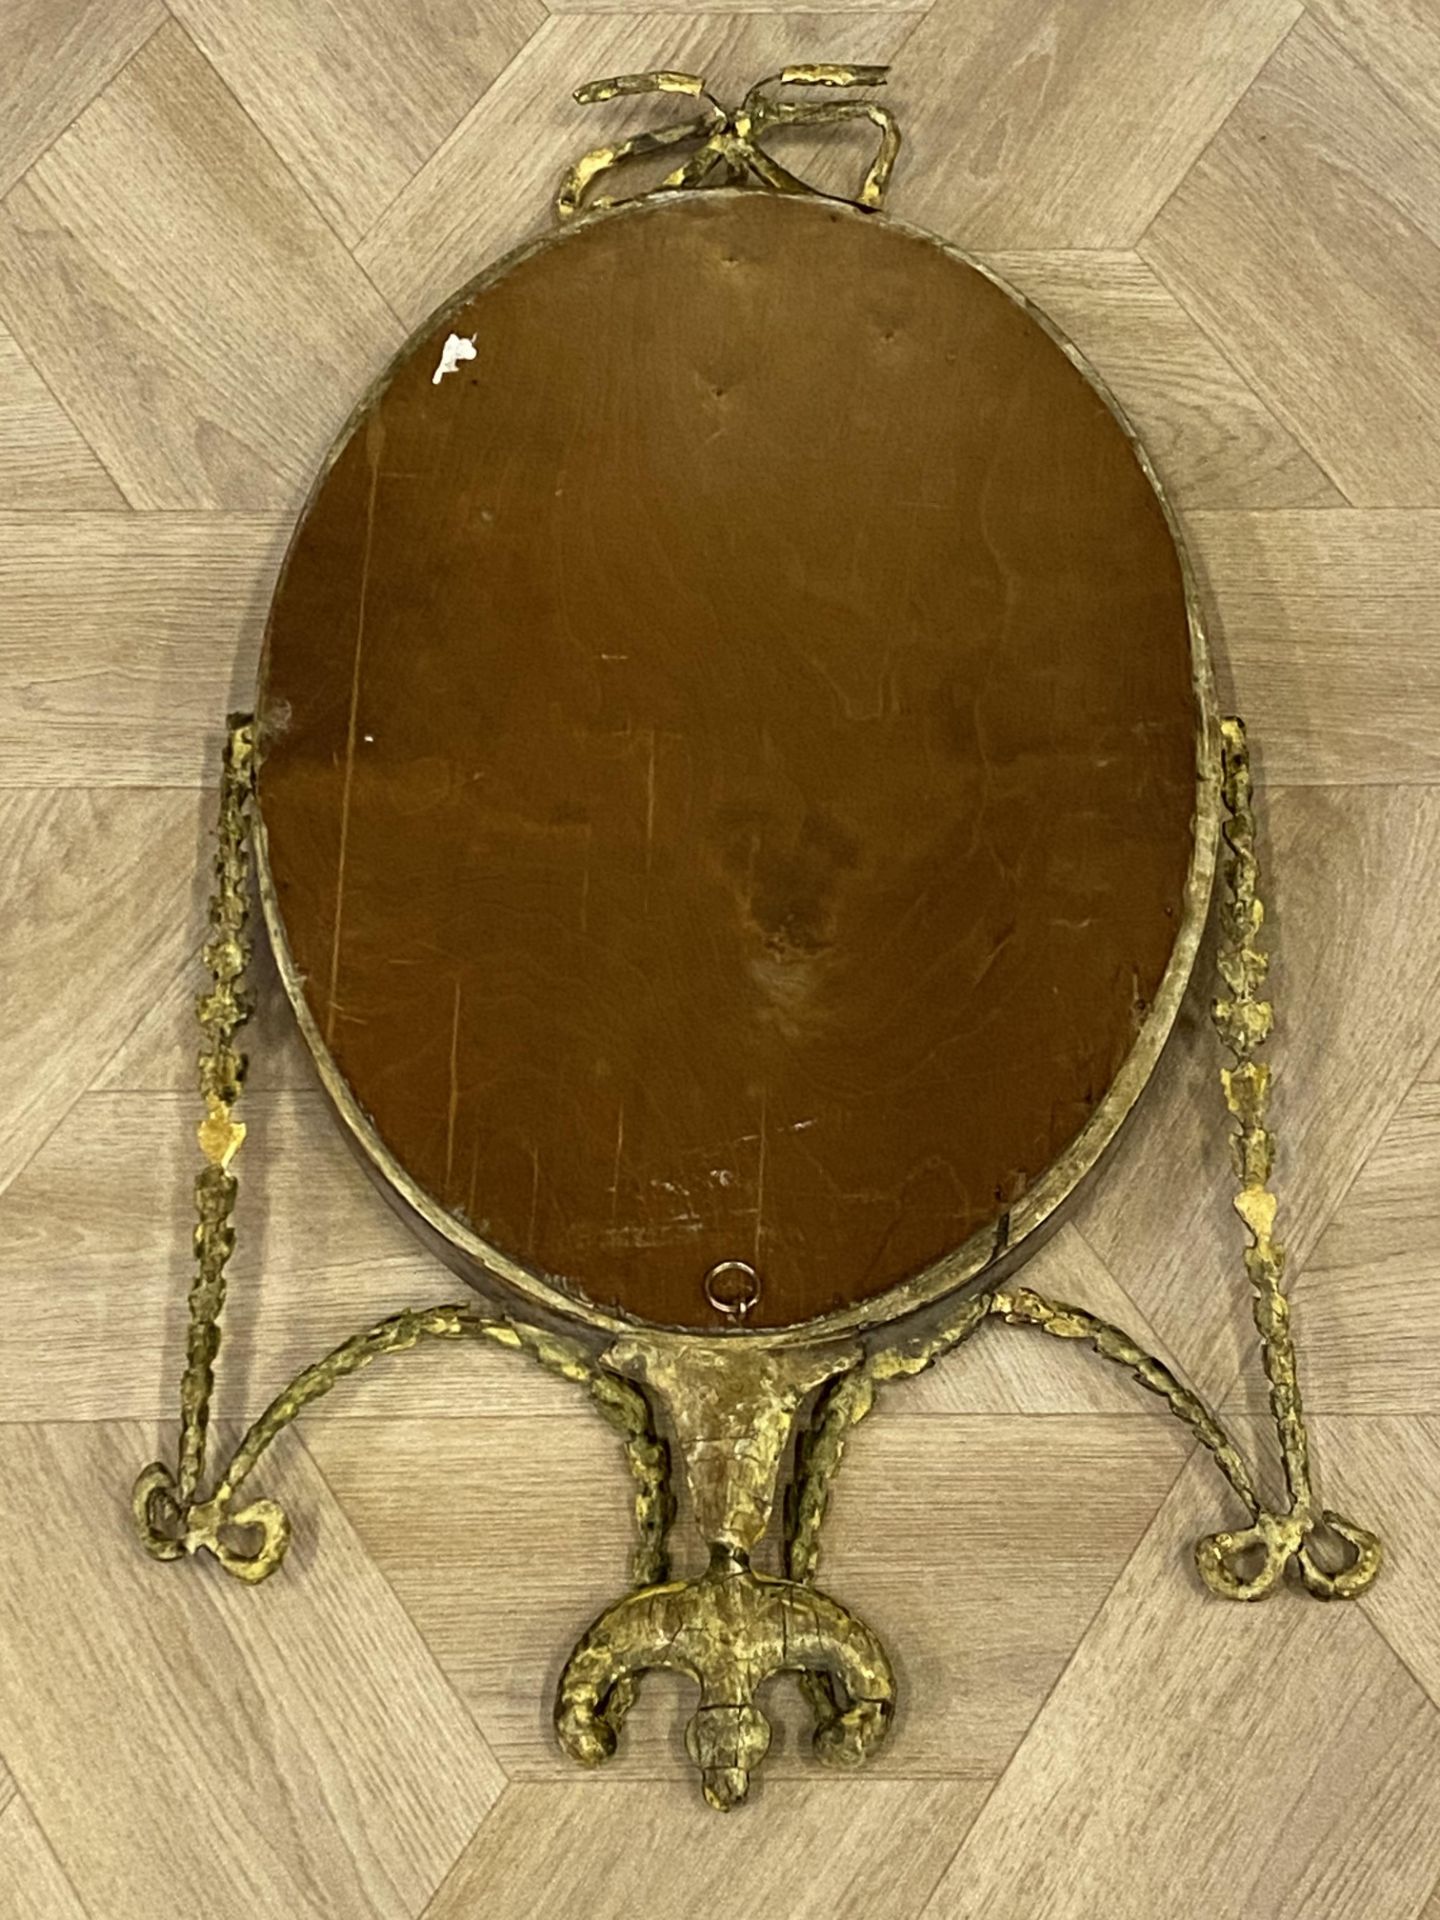 Antique oval Adam style mirror - Image 5 of 5